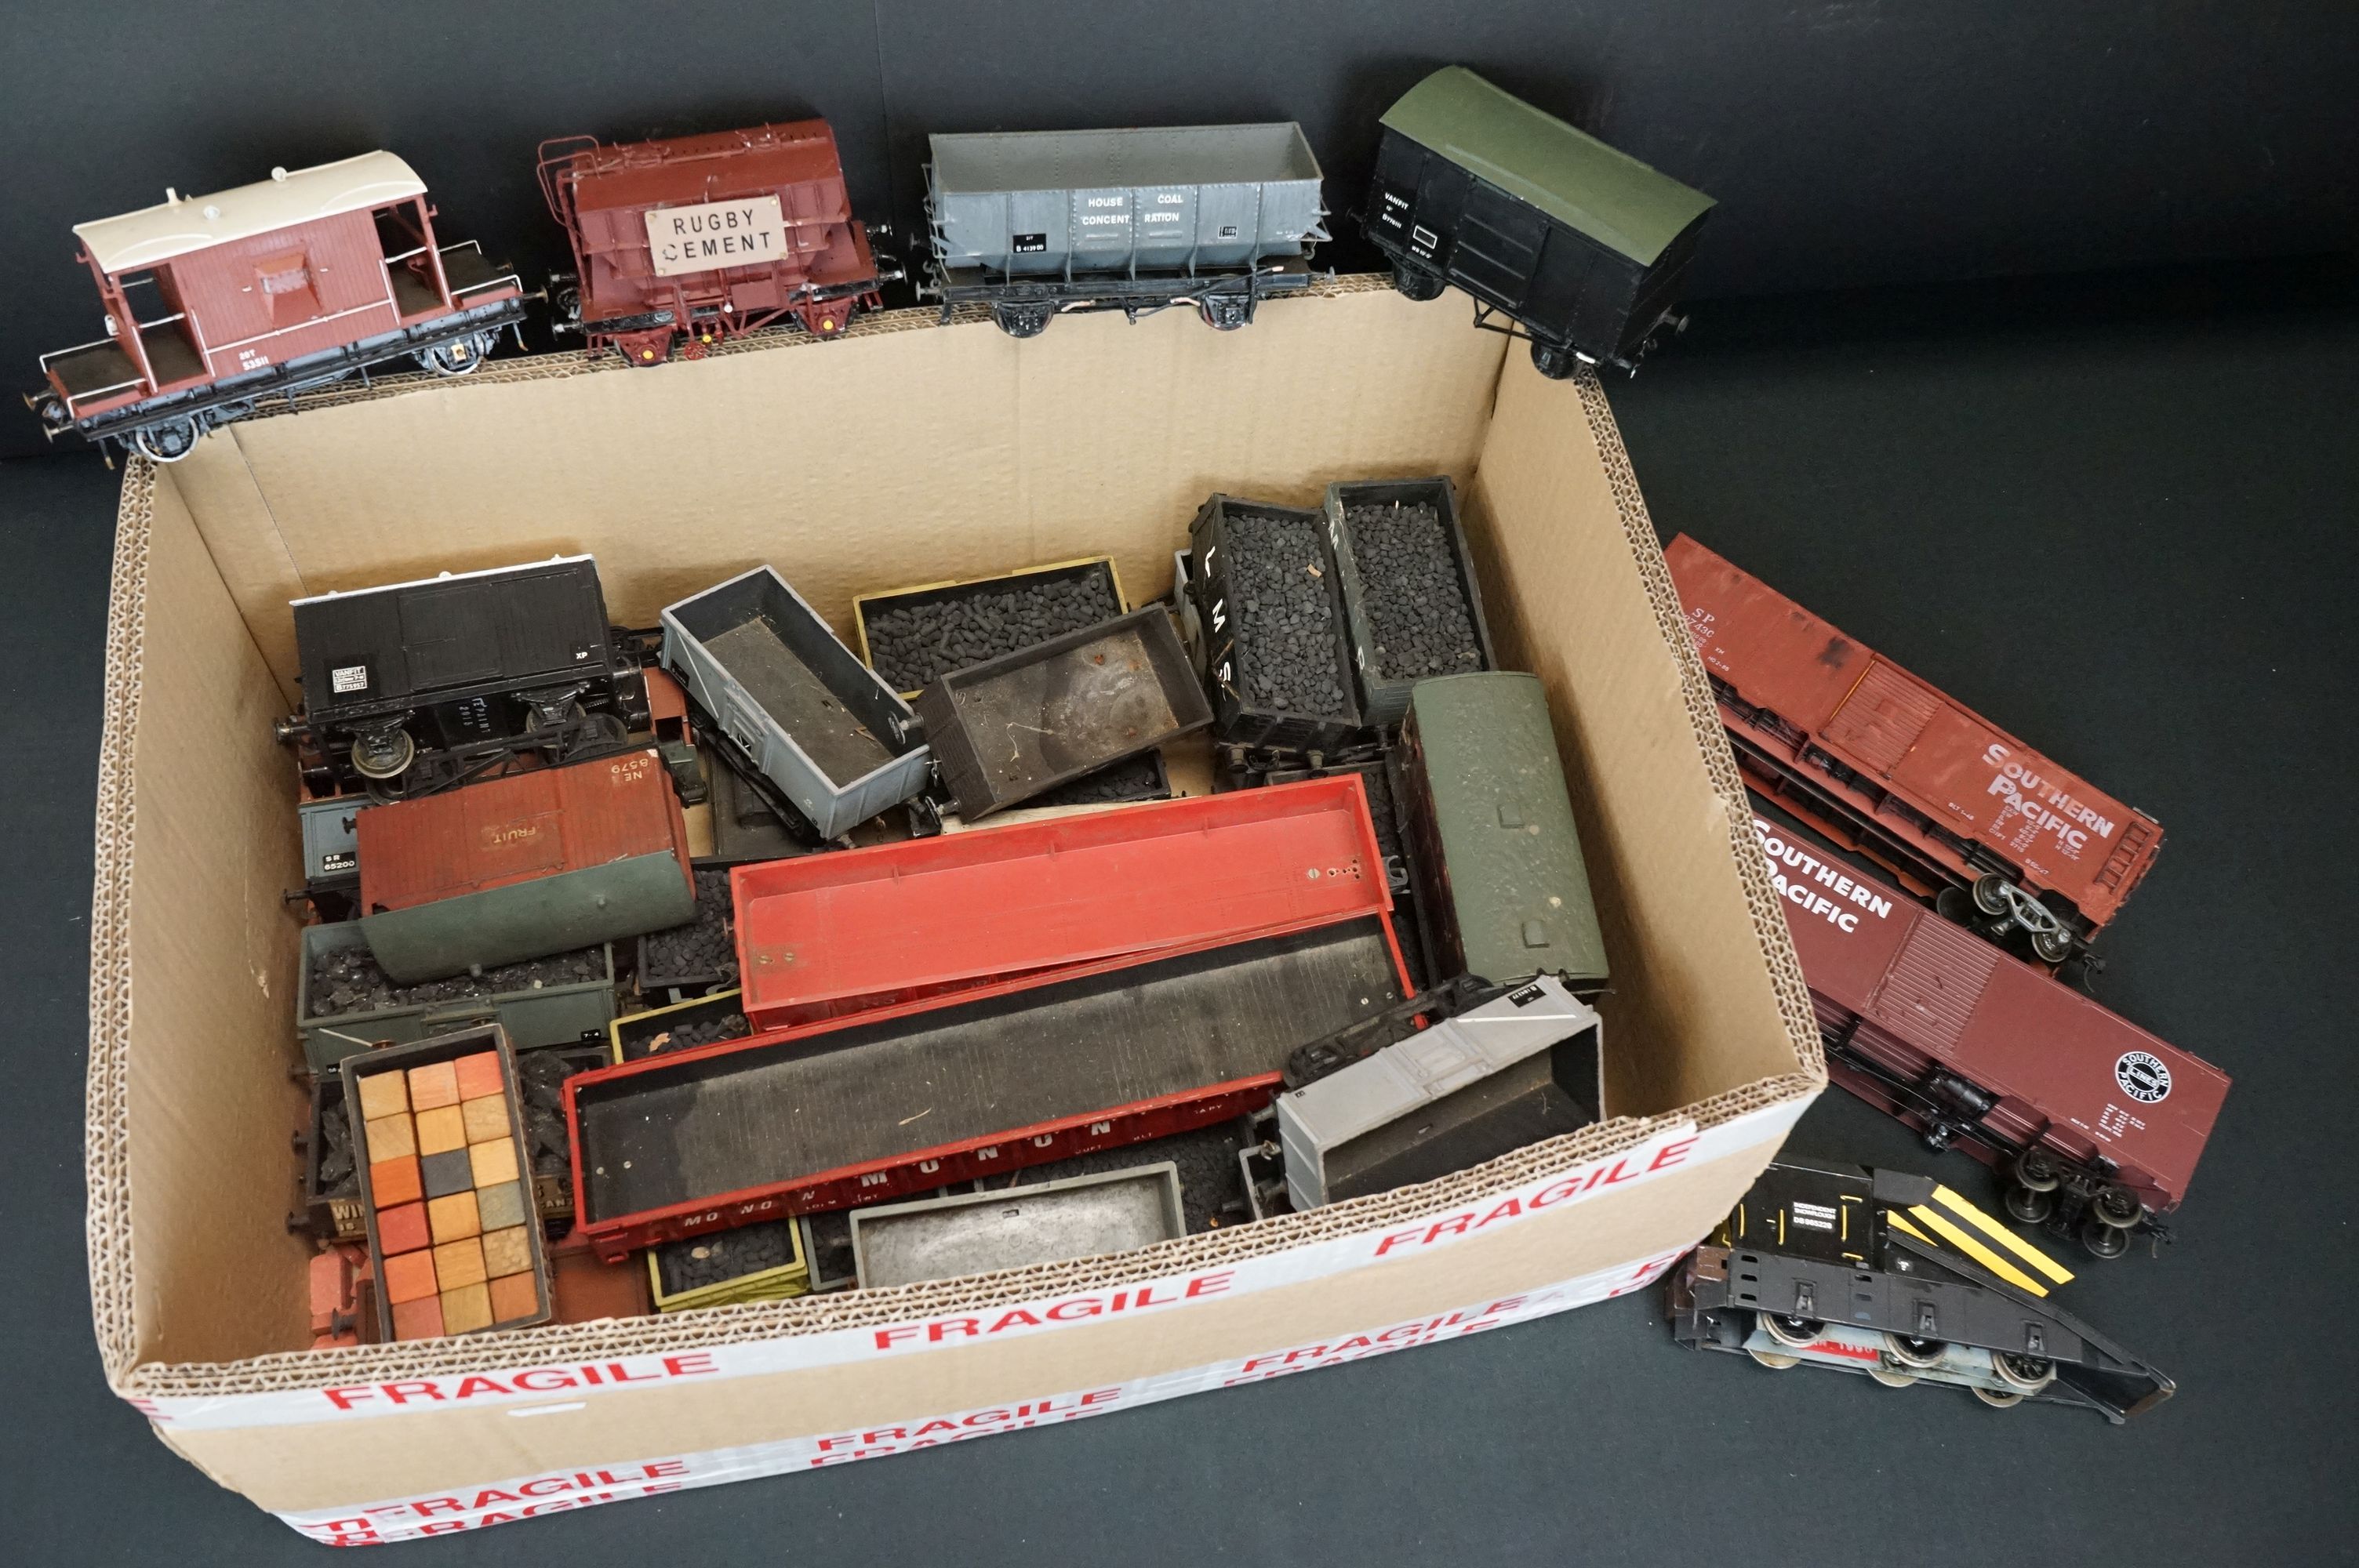 Around 40 O gauge items of rolling stock featuring various makers and kit built examples, to include